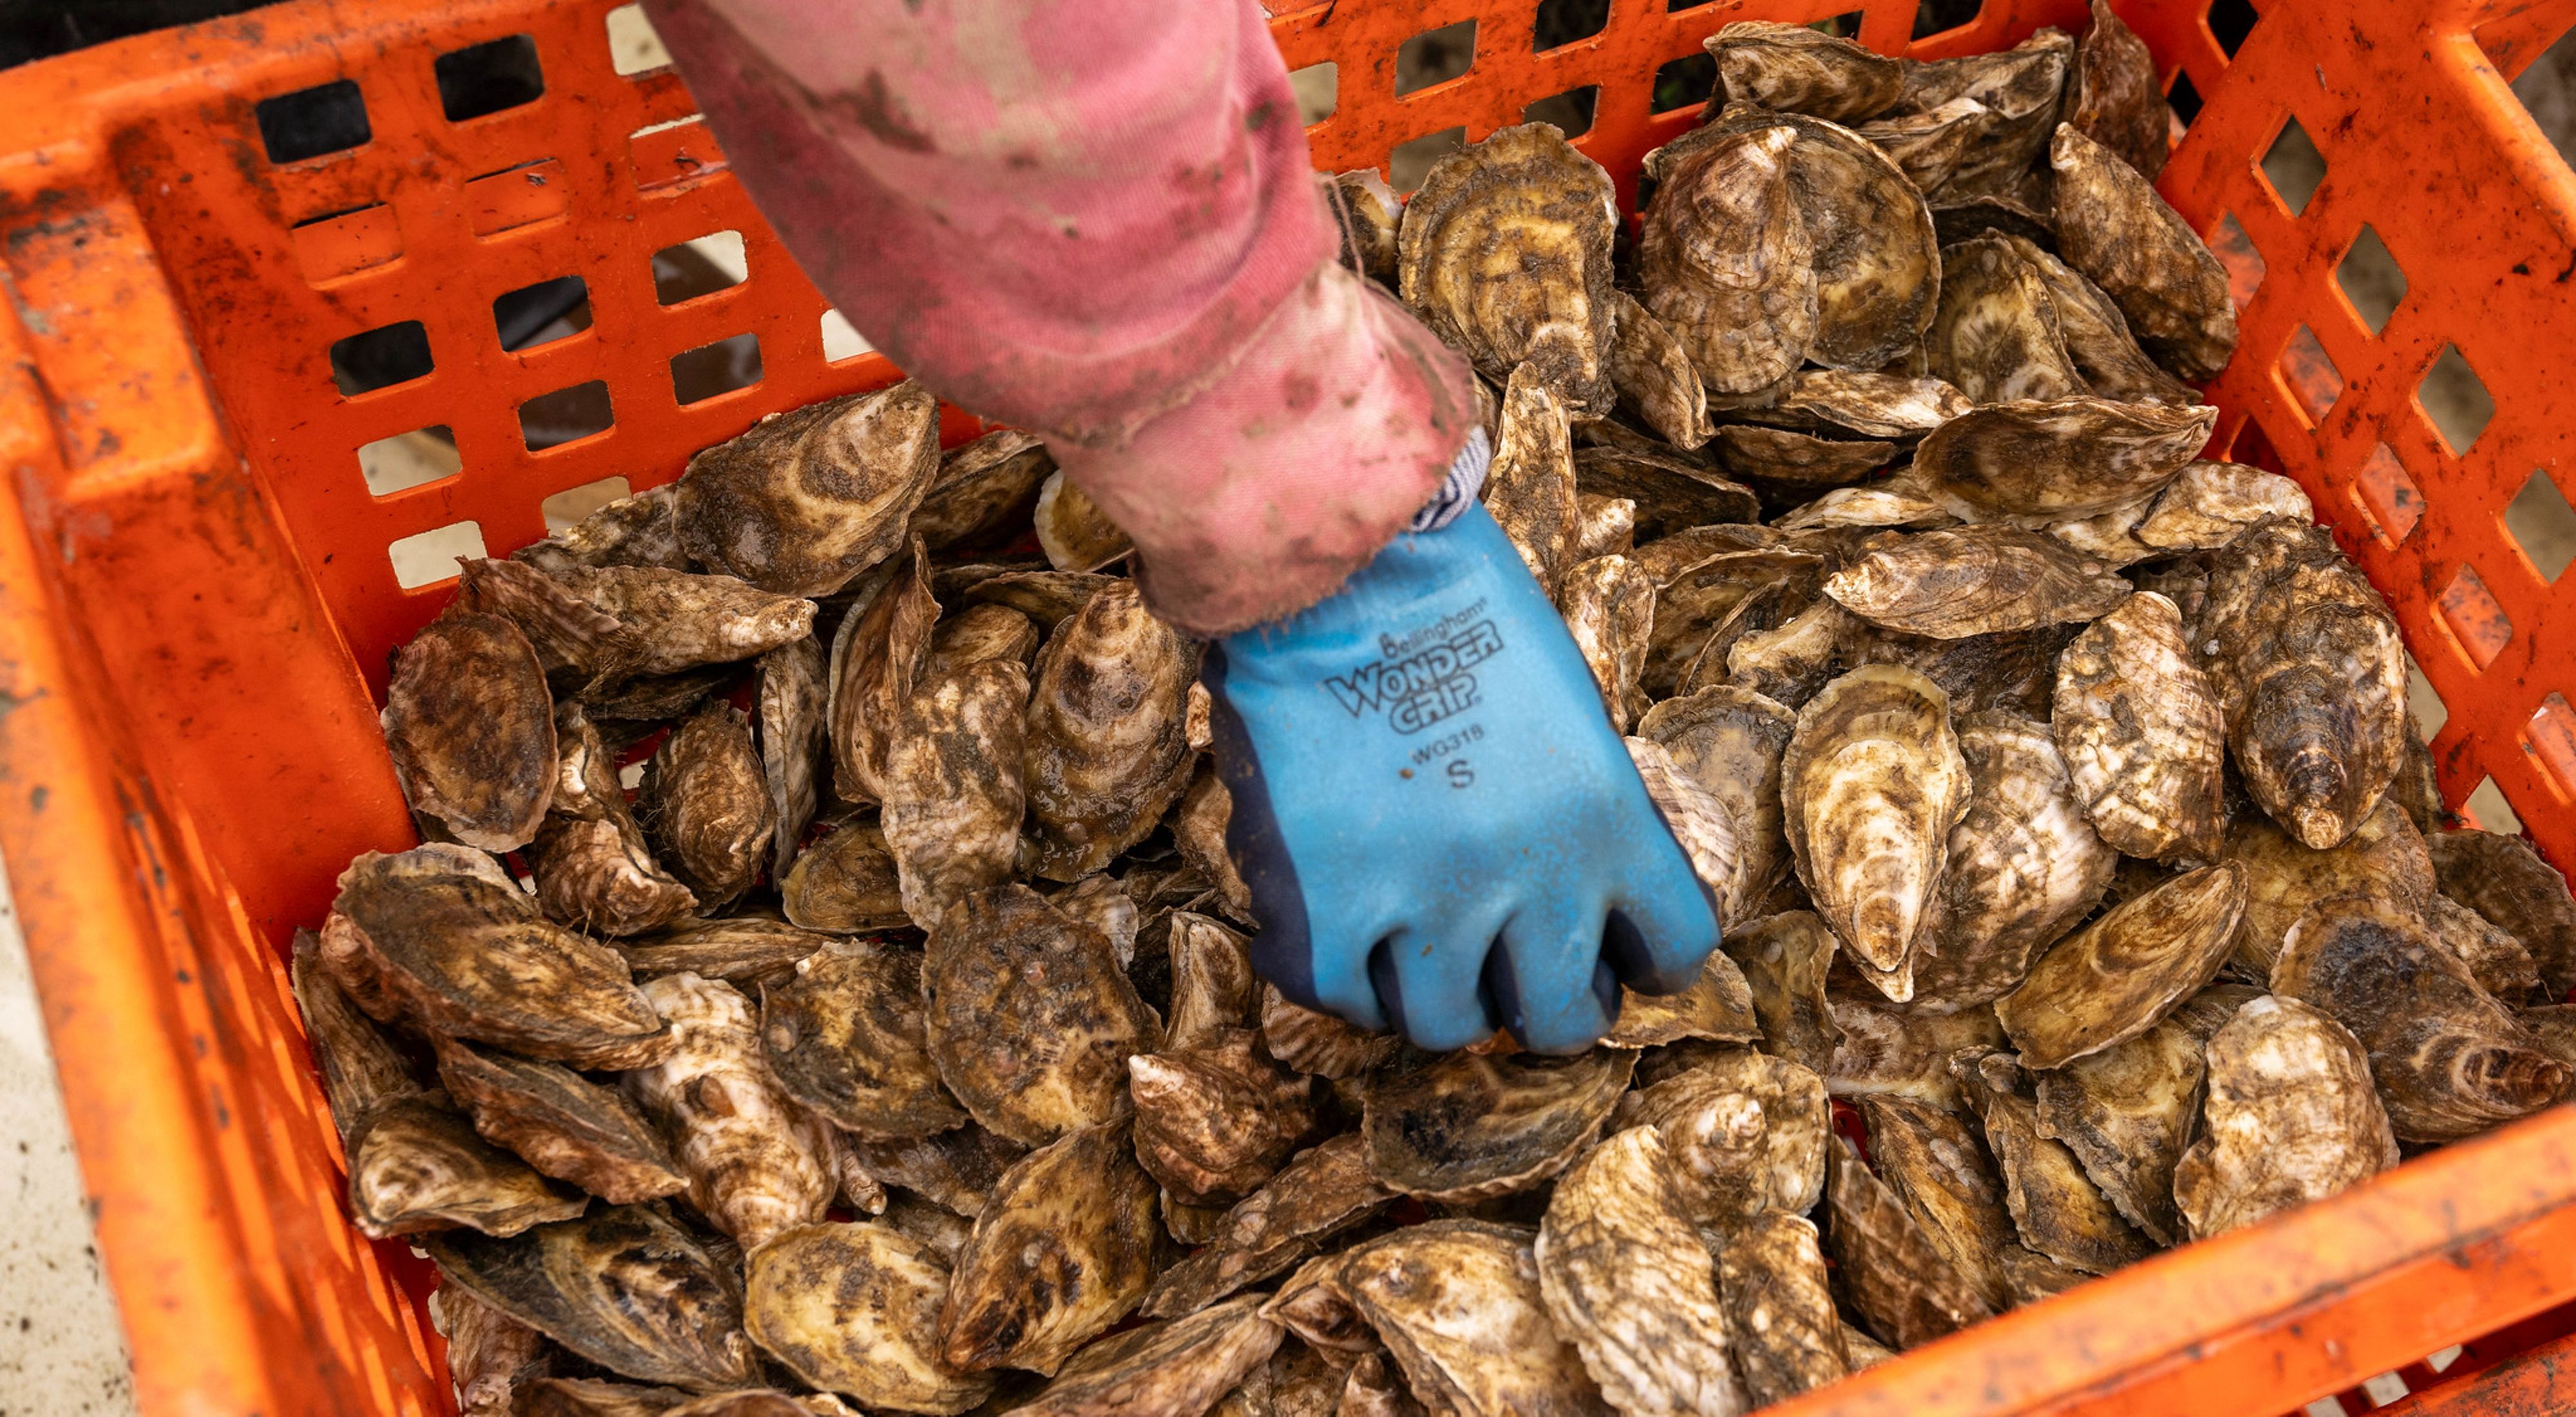 A hand wearing blue work gloves grab an oyster from a large, orange plastic basket full of oysters.